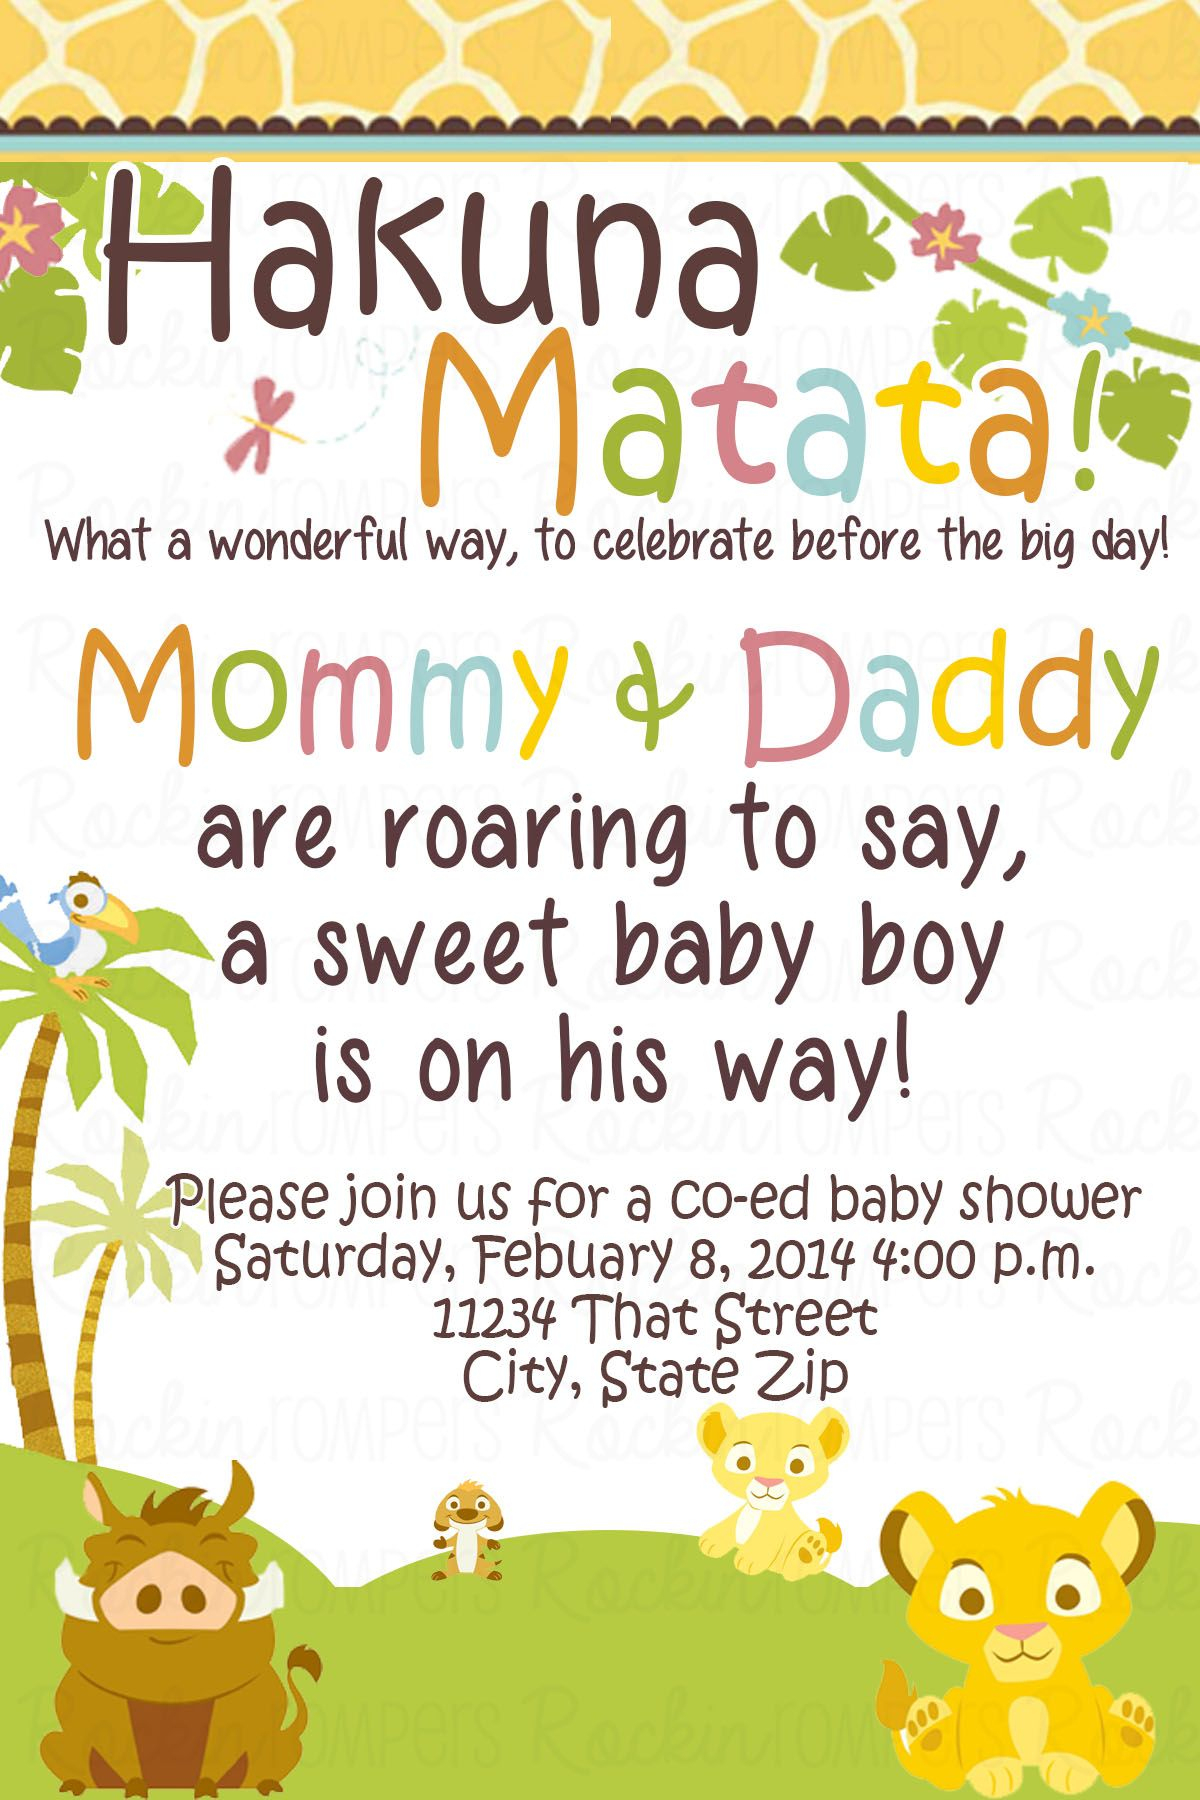 Lion King Baby Shower Invitation Www.facebook/rockinrompers Www - Free Printable Lion King Baby Shower Invitations